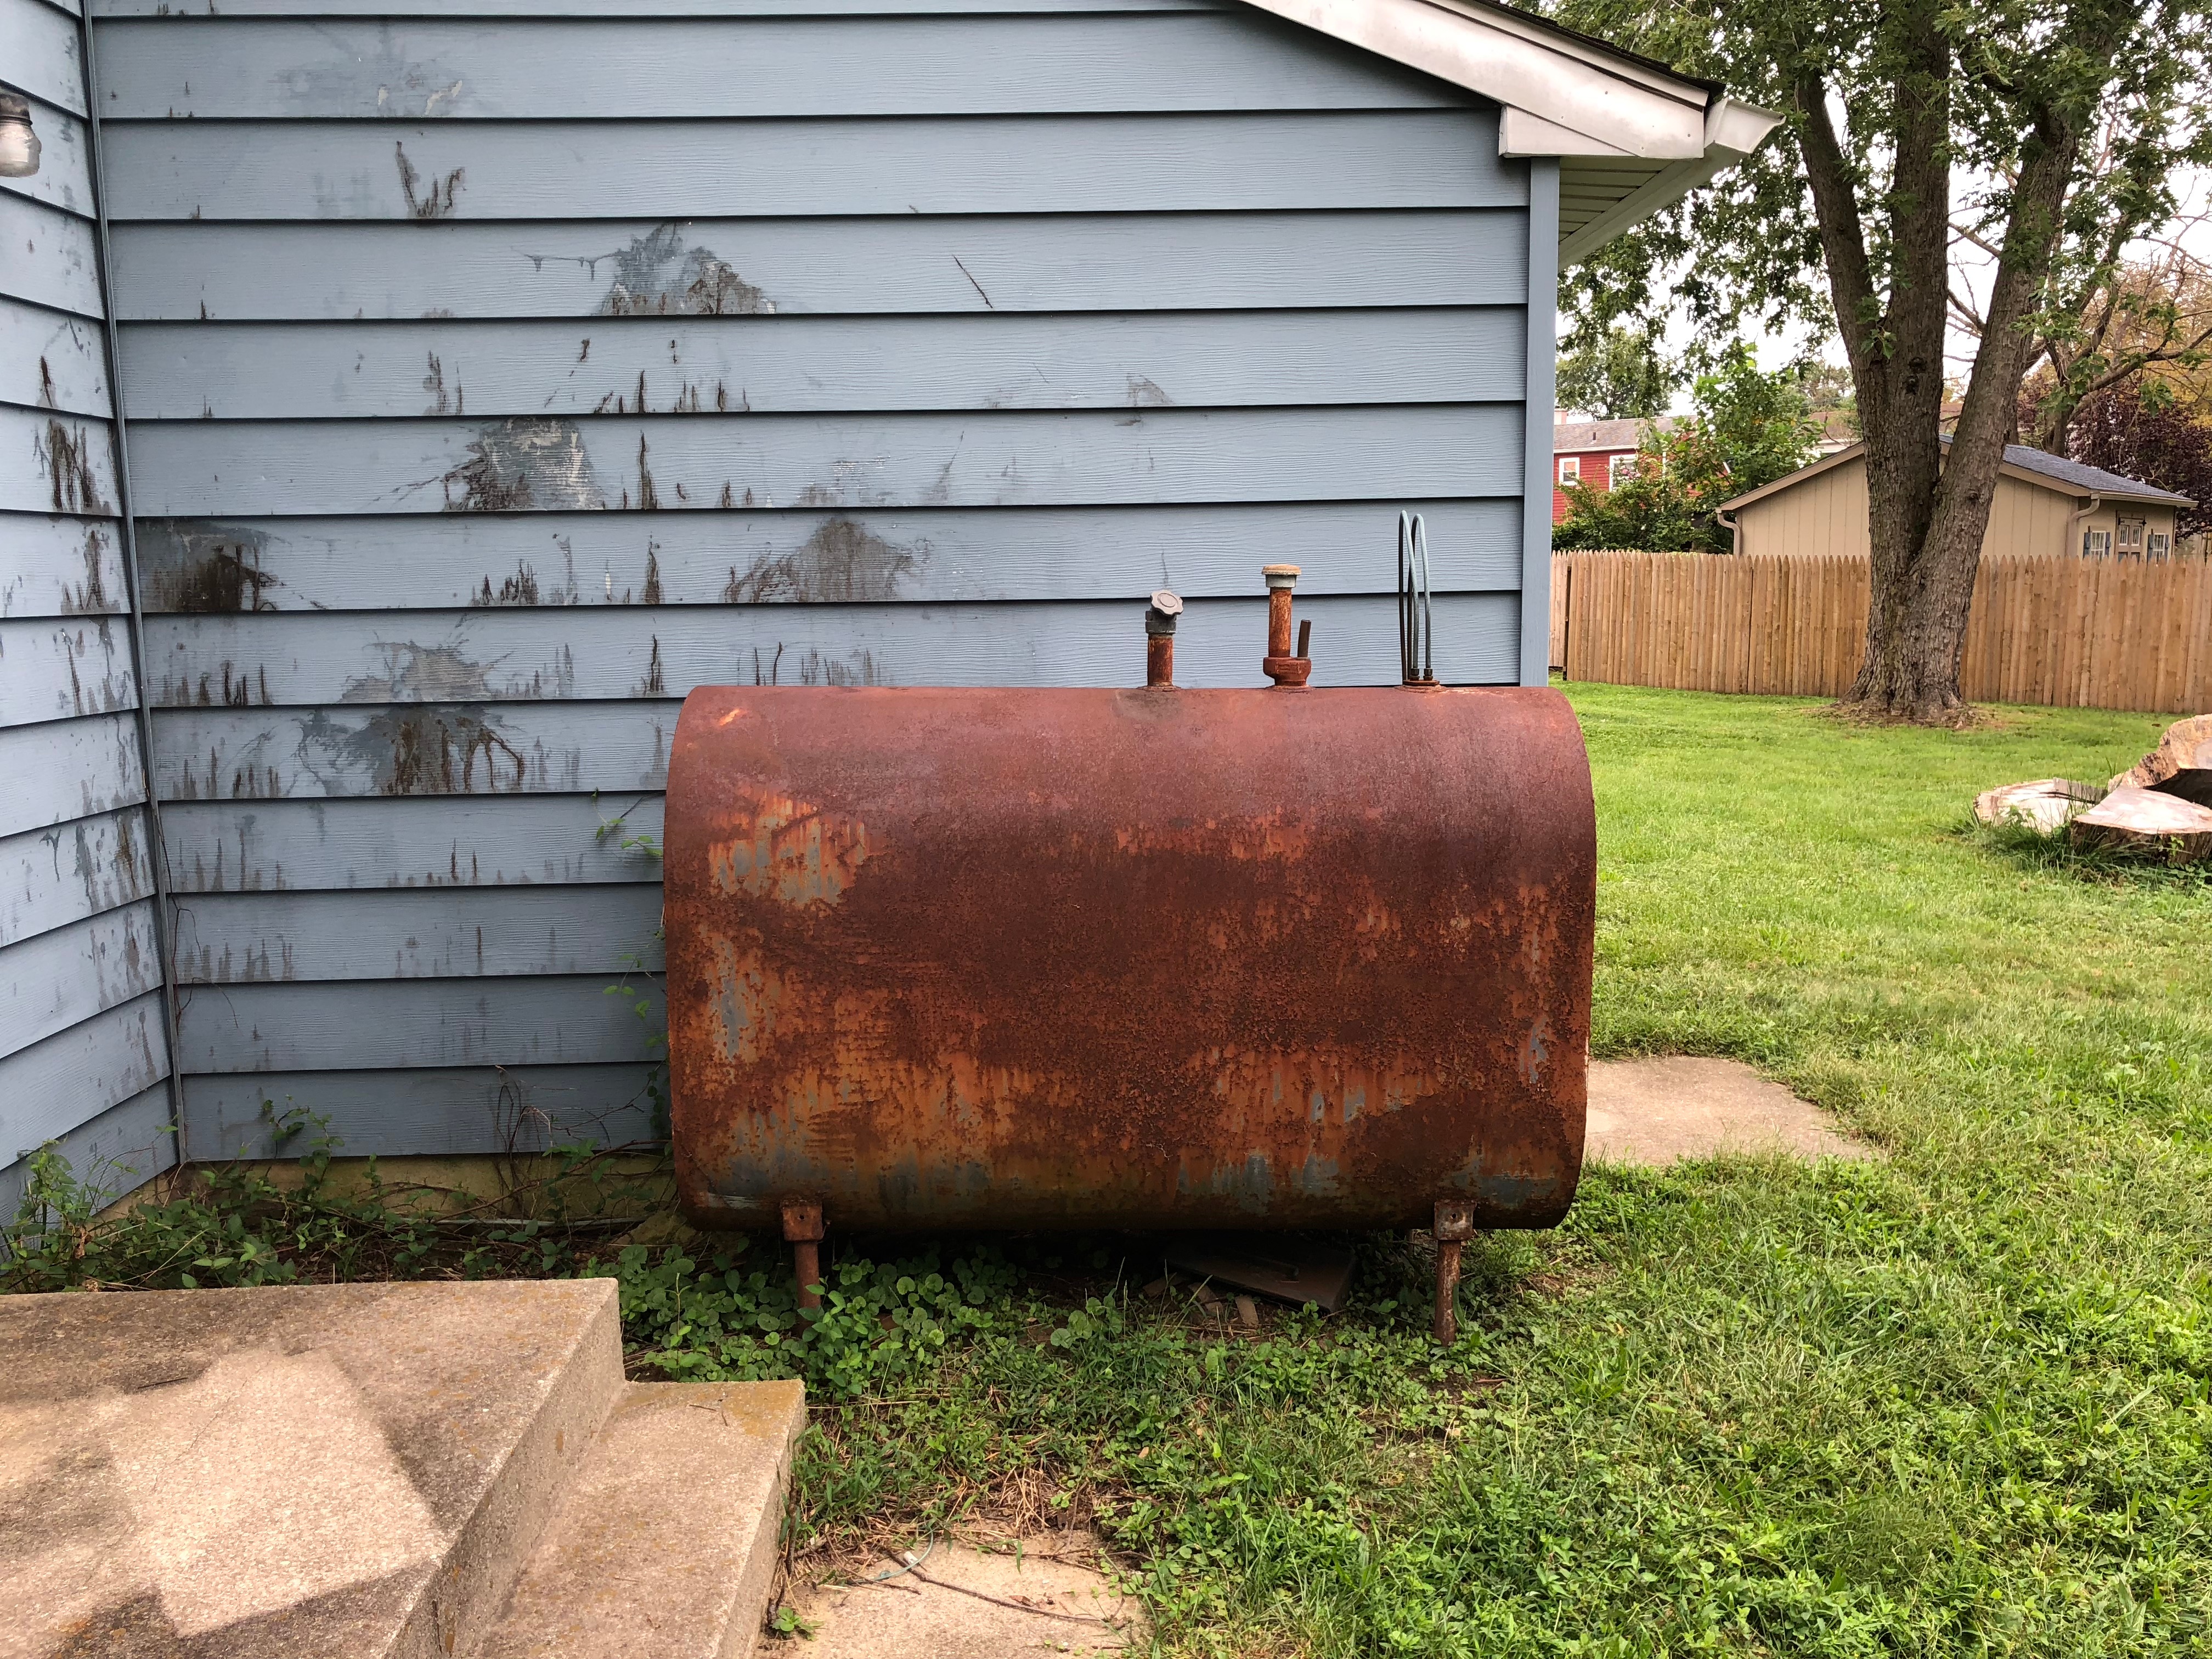 Above ground oil tank removal